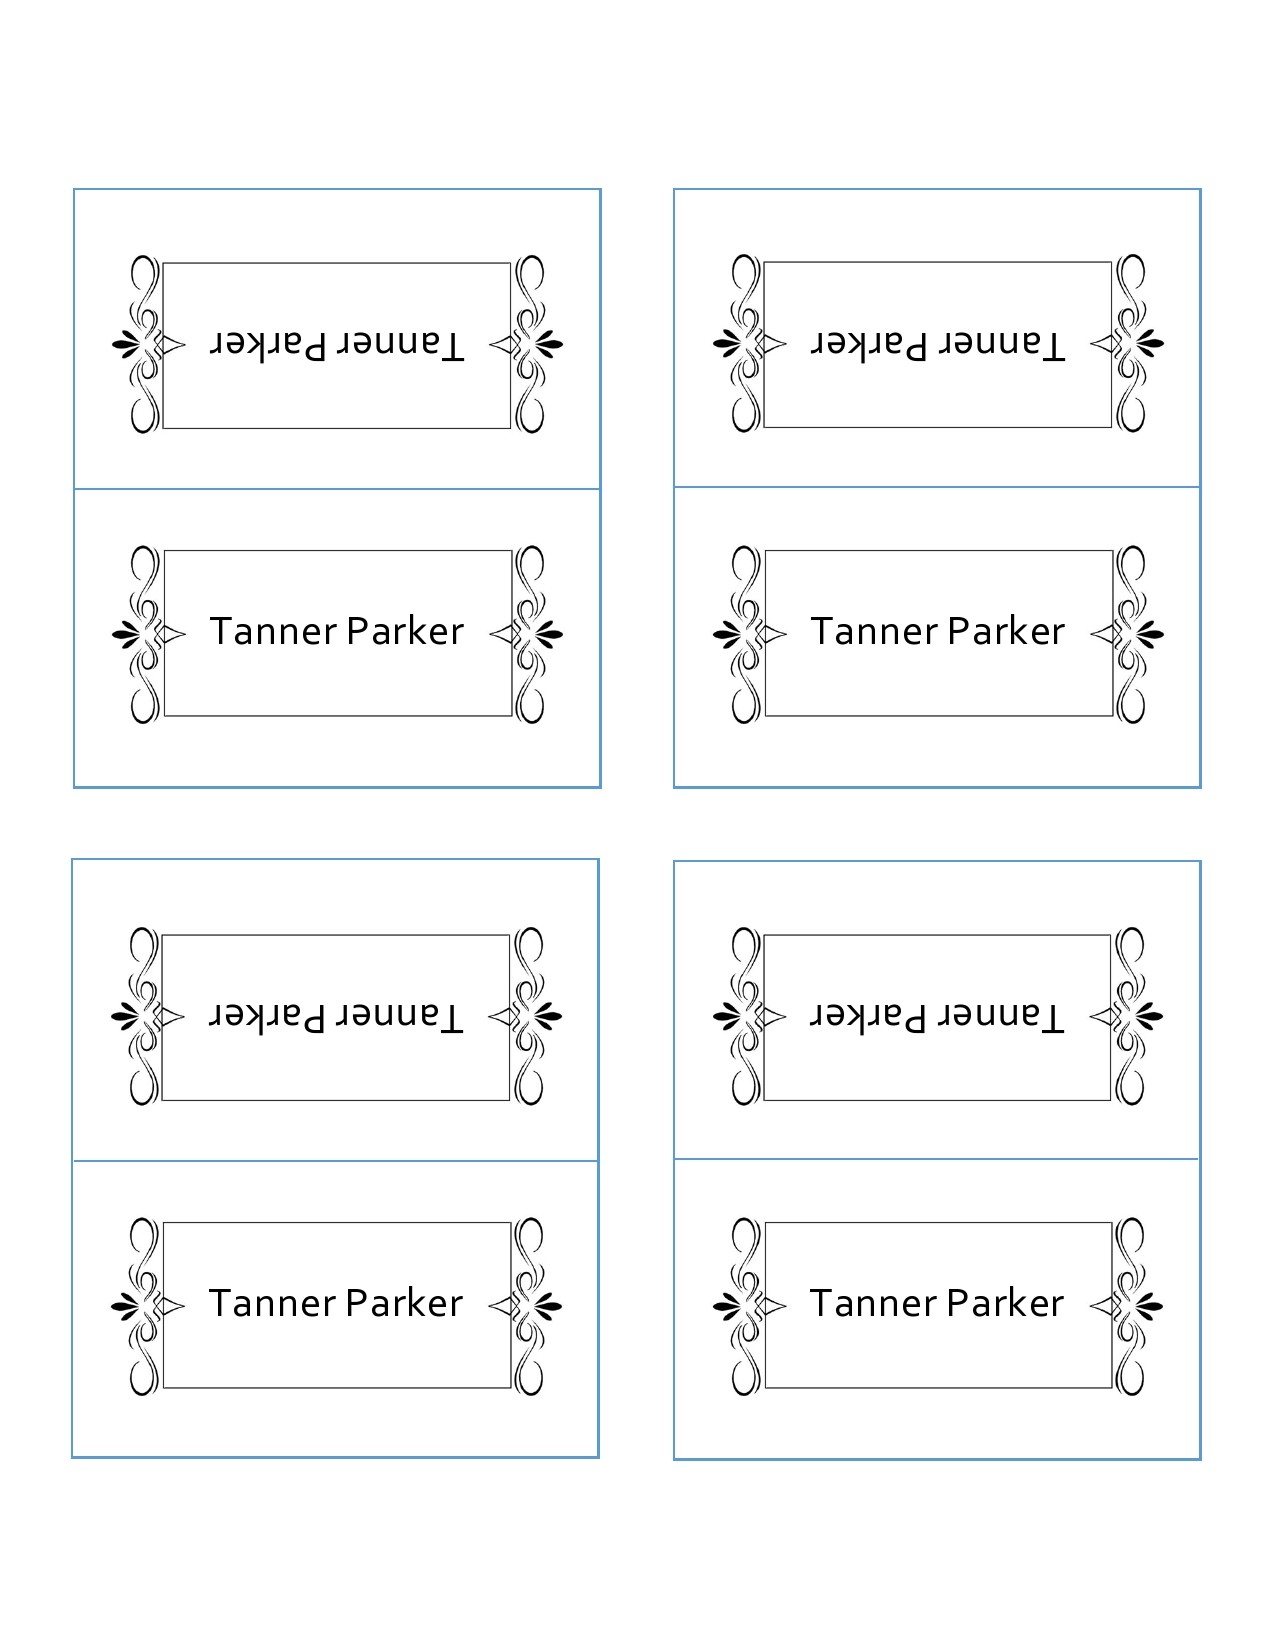 place card templates - Online Discount Shop for Electronics Intended For Free Template For Place Cards 6 Per Sheet